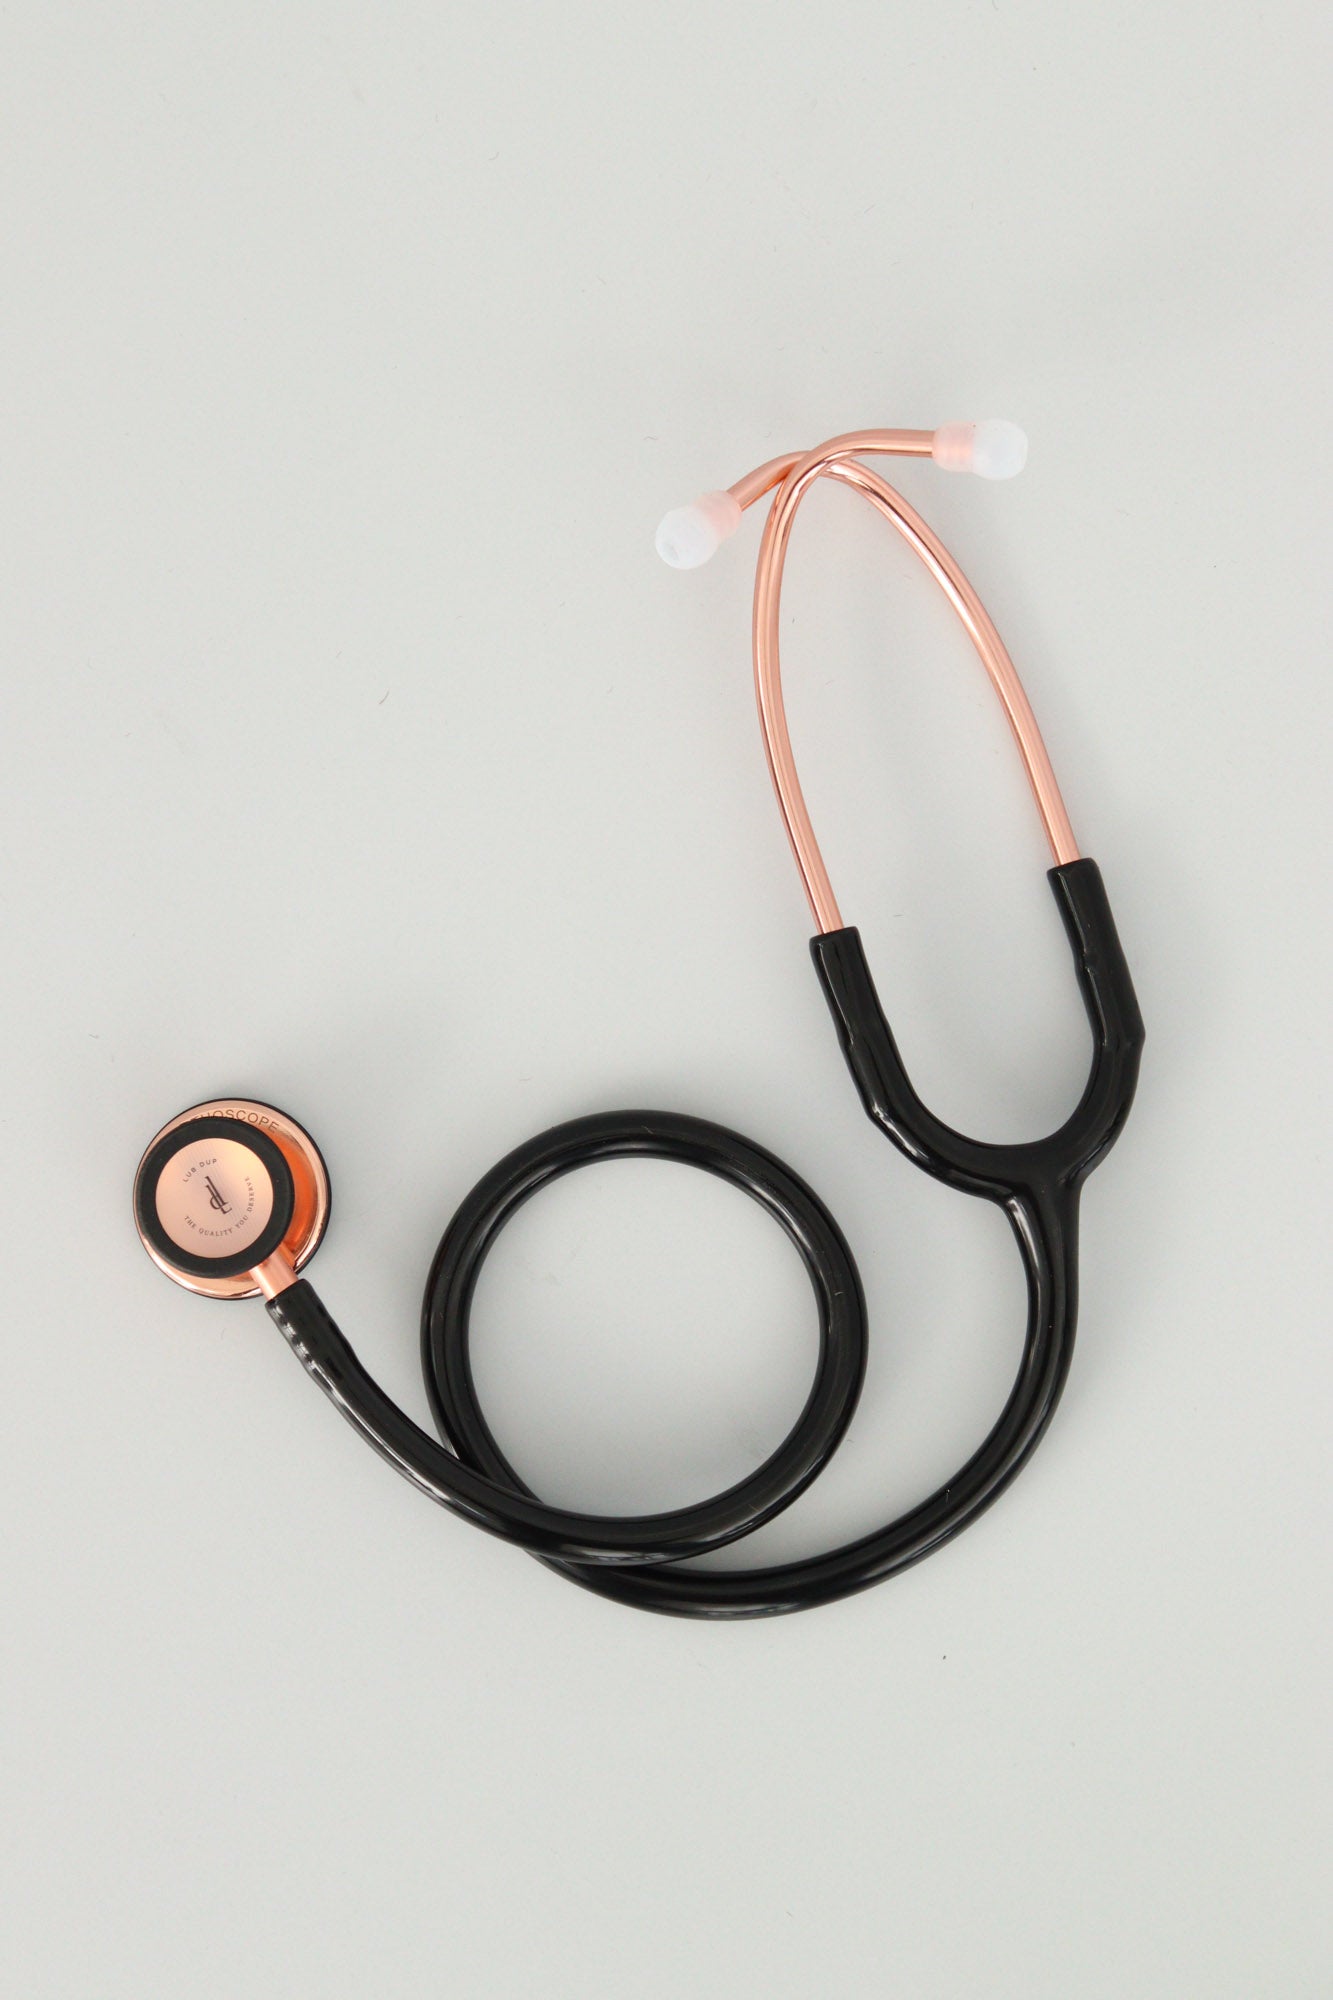 Lub Dup Adult Stethoscope - Black-Rose Gold Edition